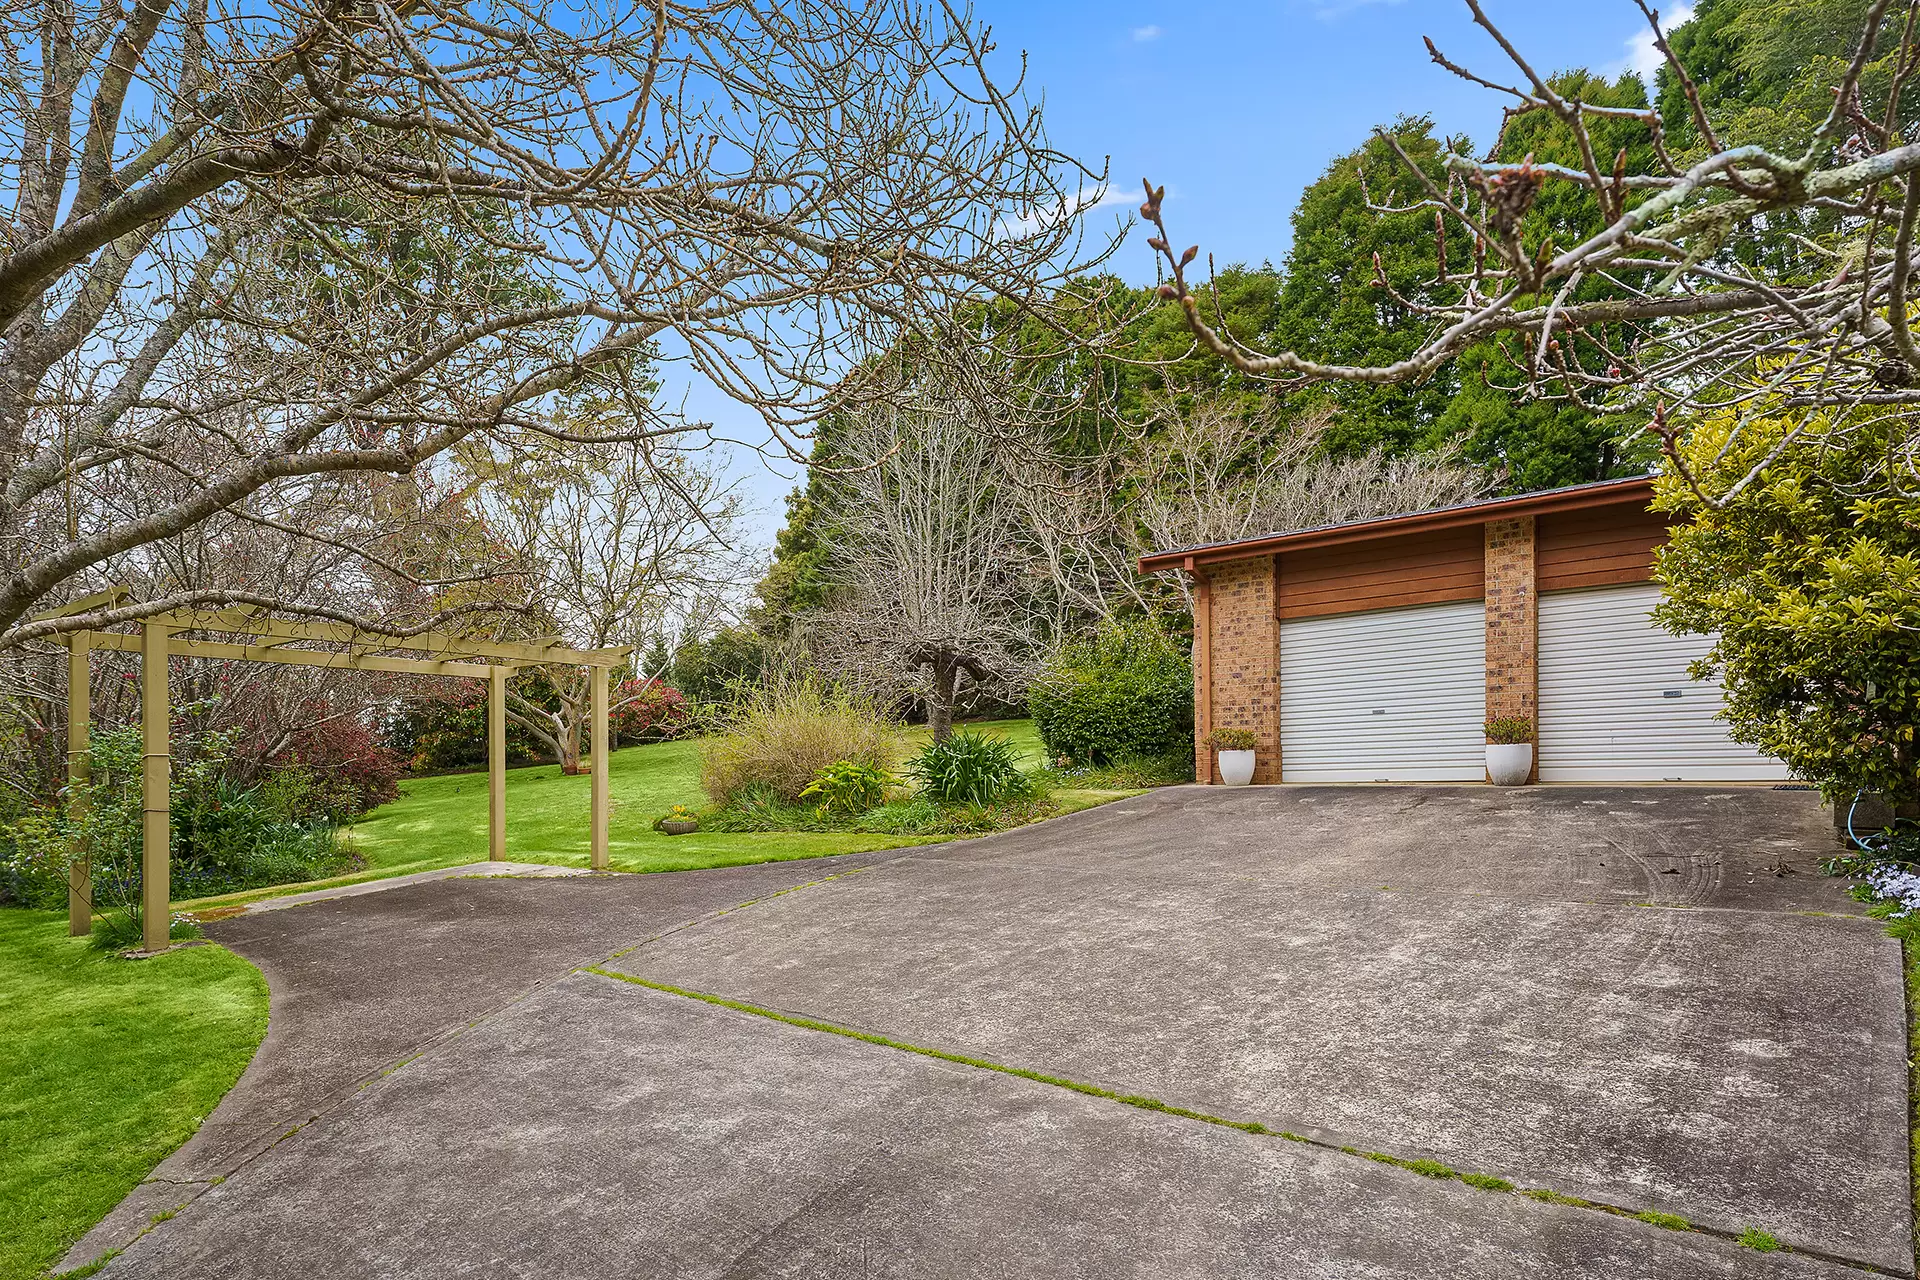 Photo #17: 4 Fairway Drive, Bowral - Sold by Drew Lindsay Sotheby's International Realty